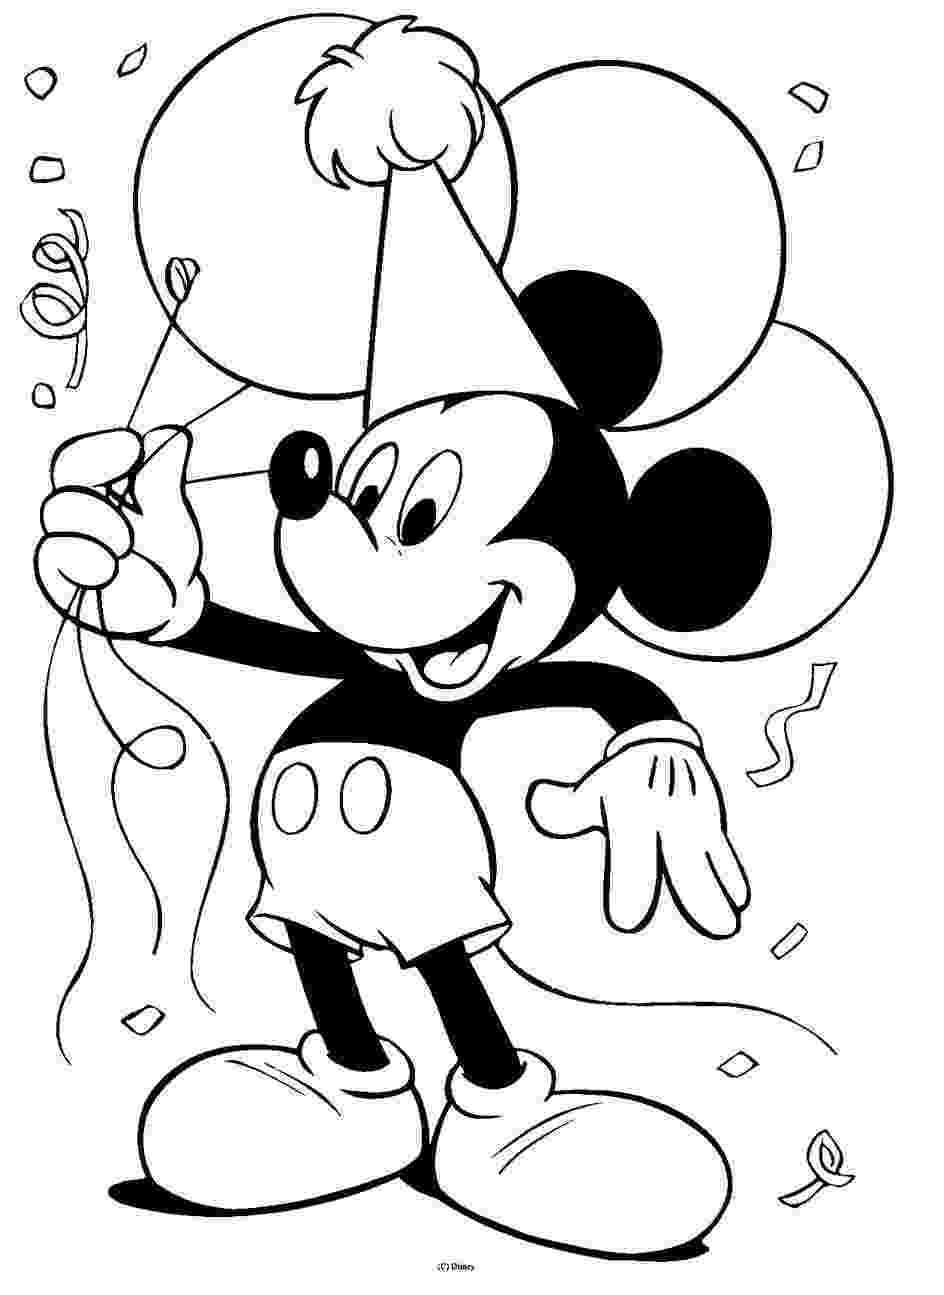 mickey mouse coloring pictures ultimate pictures mix disney coloring pages mickey coloring pictures mouse 